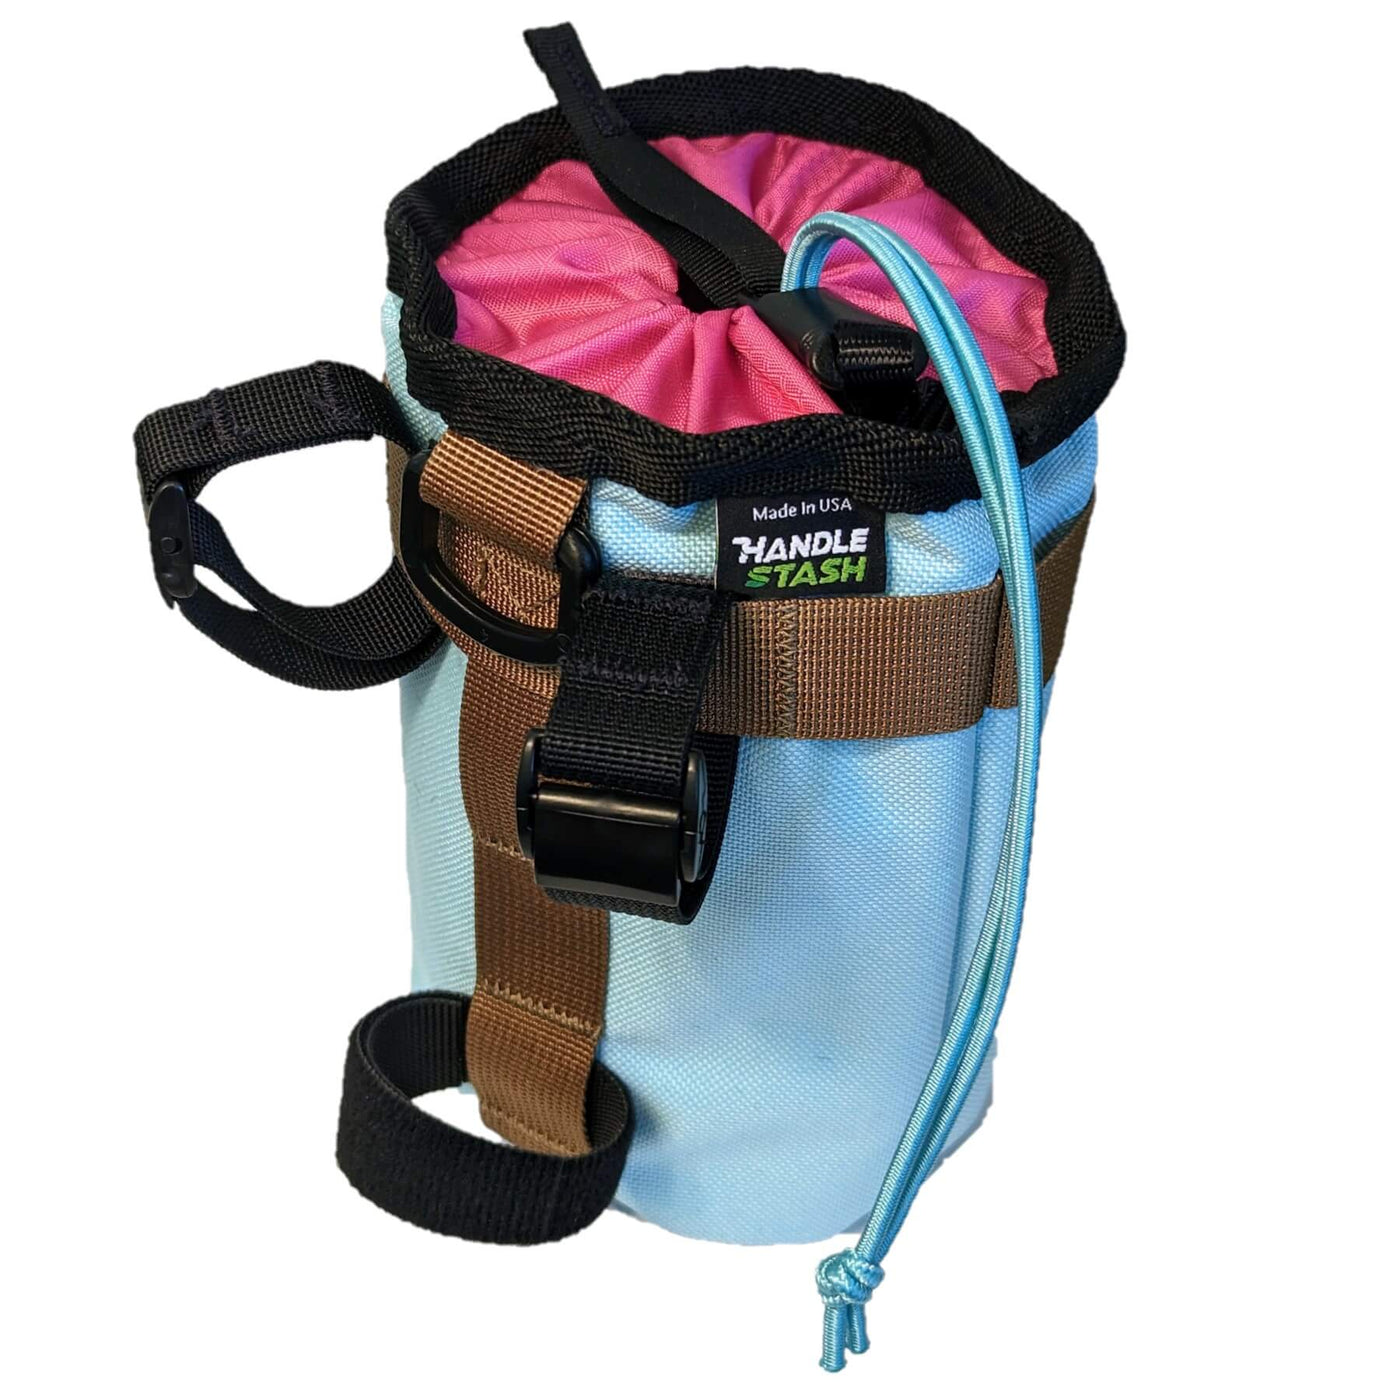 Insulated stem bag with straps in teal and pink